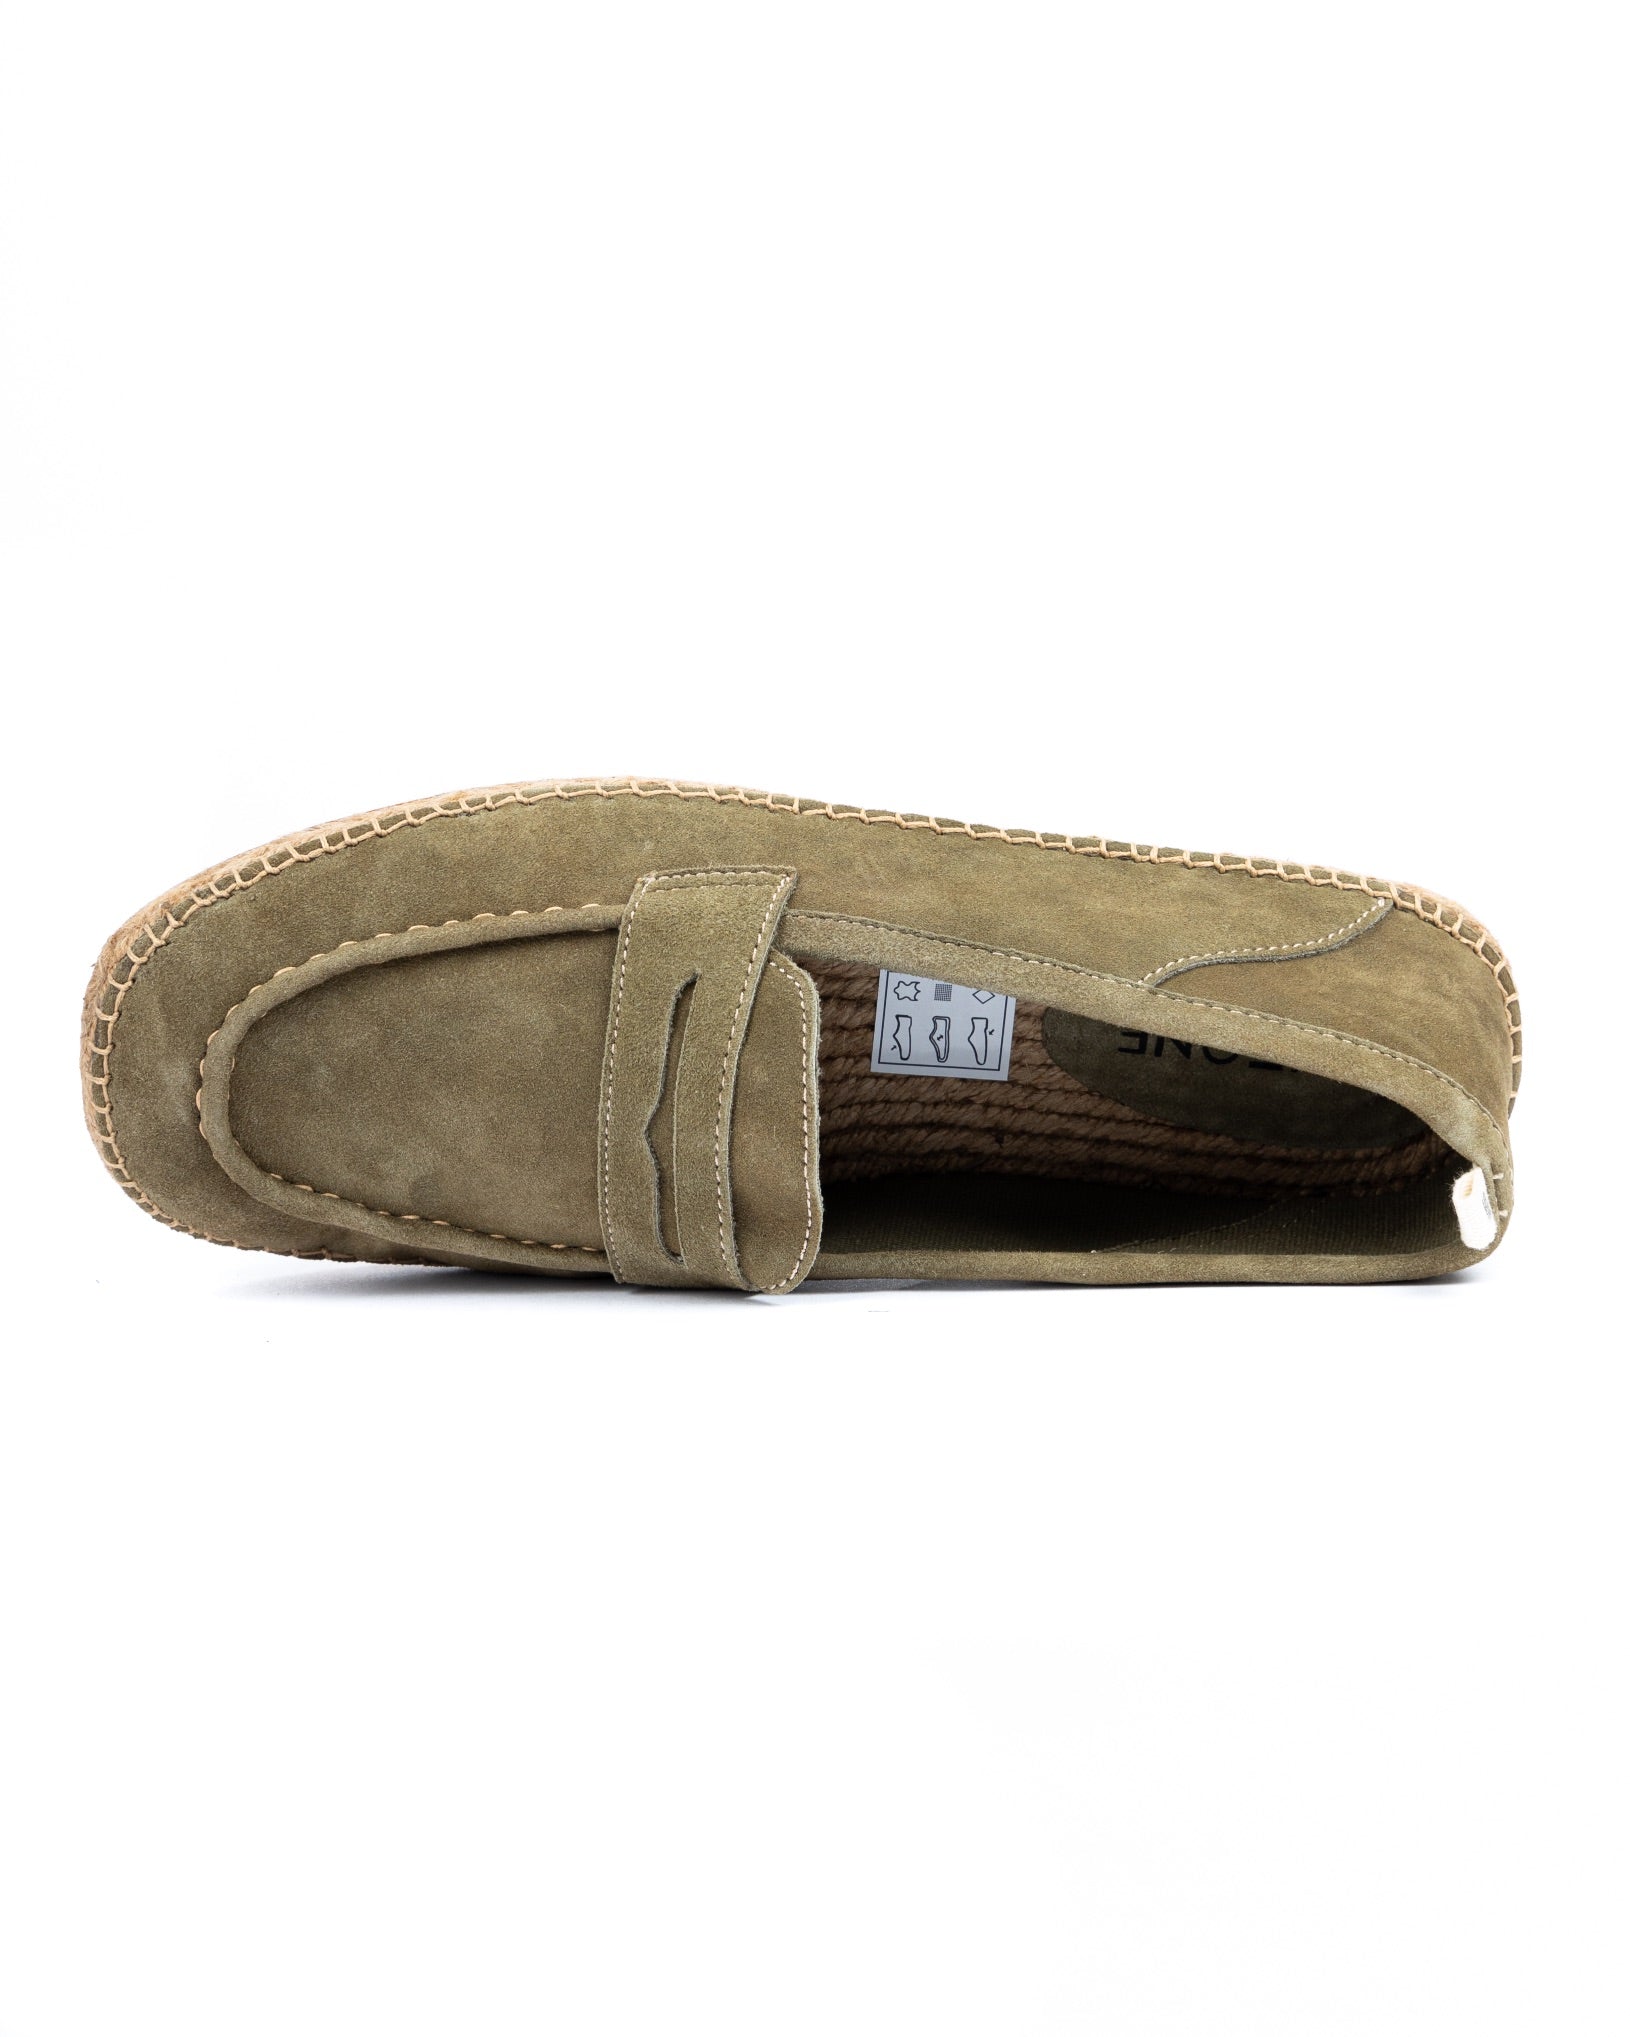 Roma - green suede moccasin with rope sole